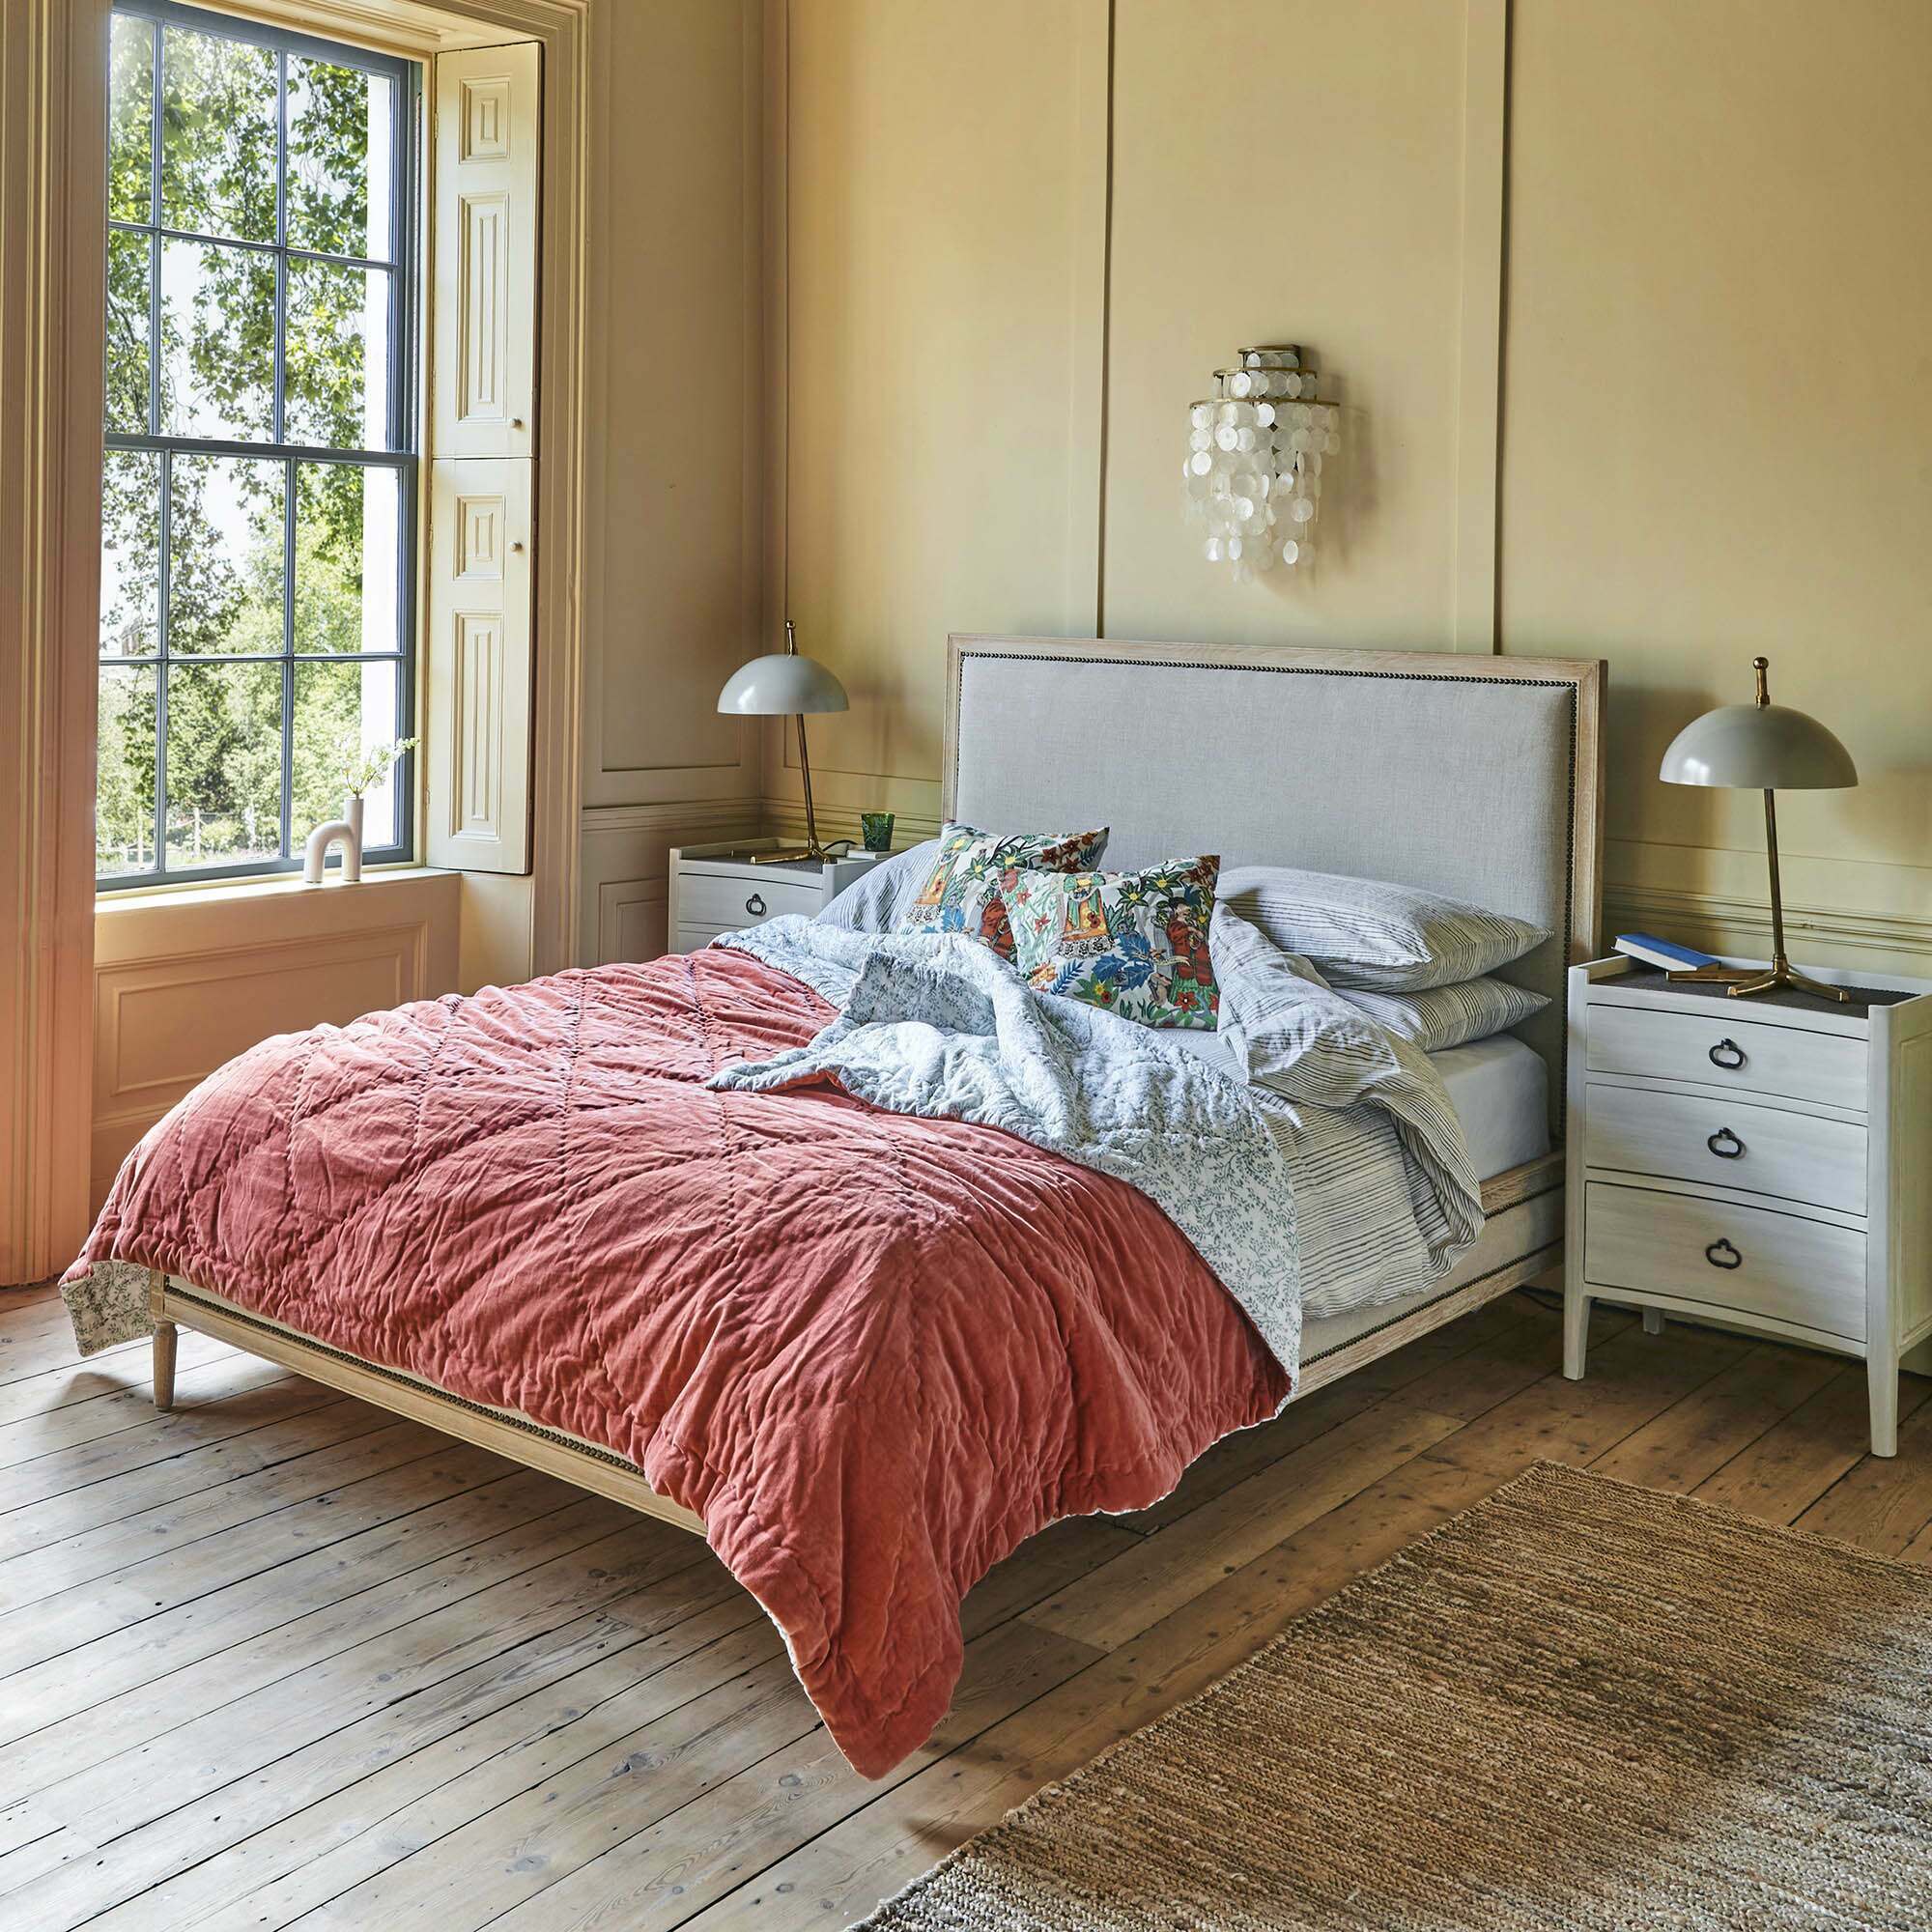 Read more about Graham and green luna natural linen super king size bed